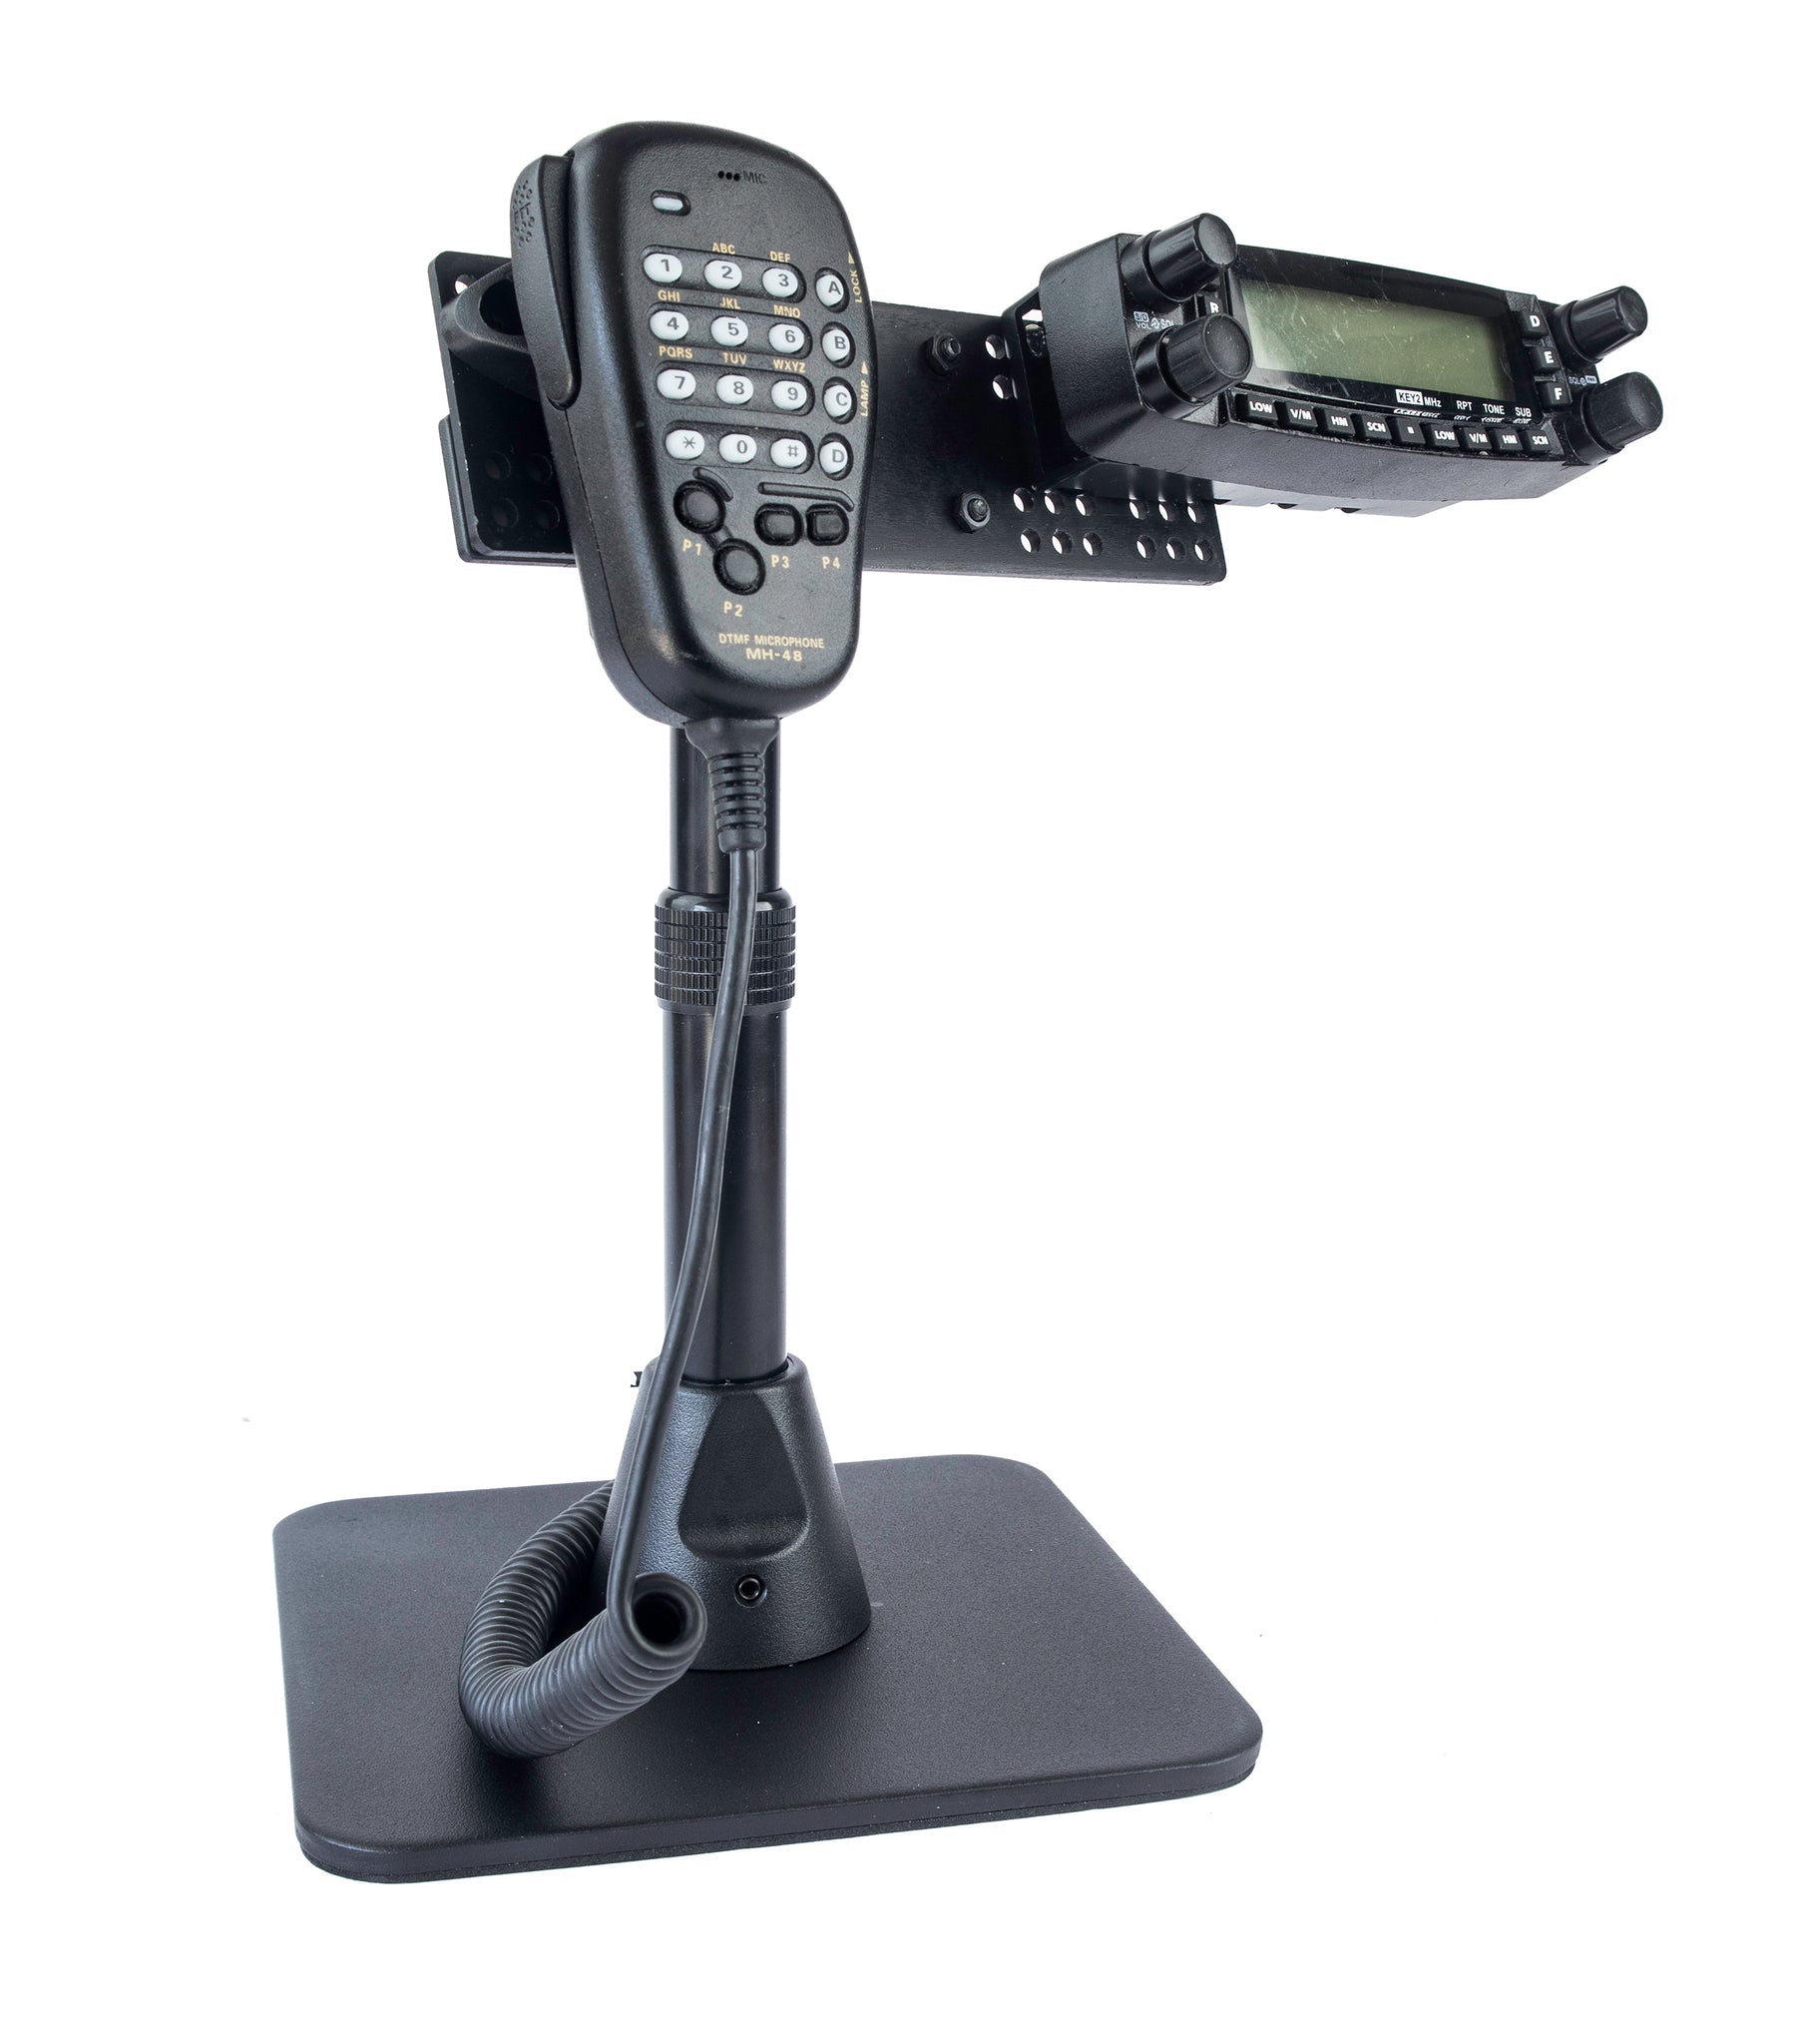 Base Mount With Microphone Holder For The Yaesu FT-857 FT-7800 FT